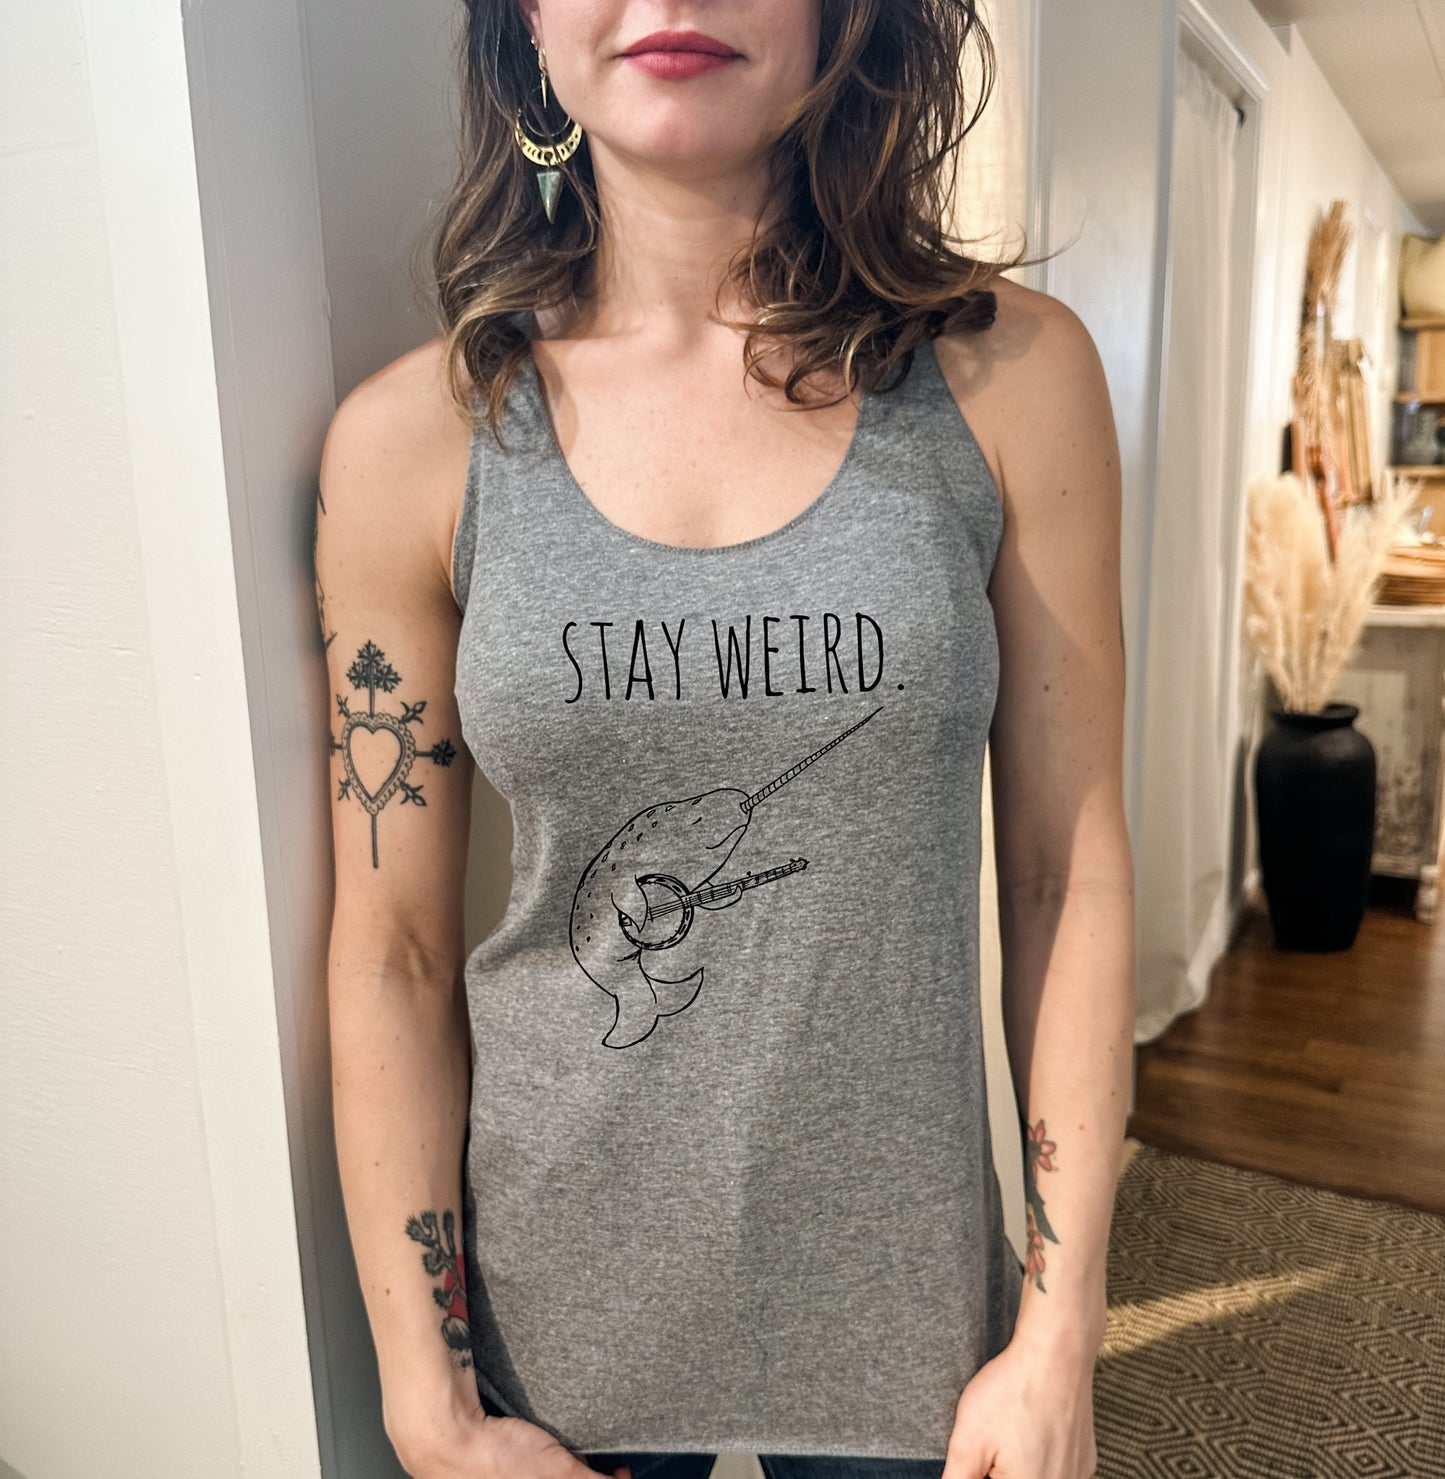 Stay Weird (Narwhal / Banjo) - Women's Tank - Heather Gray, Tahiti, or Envy